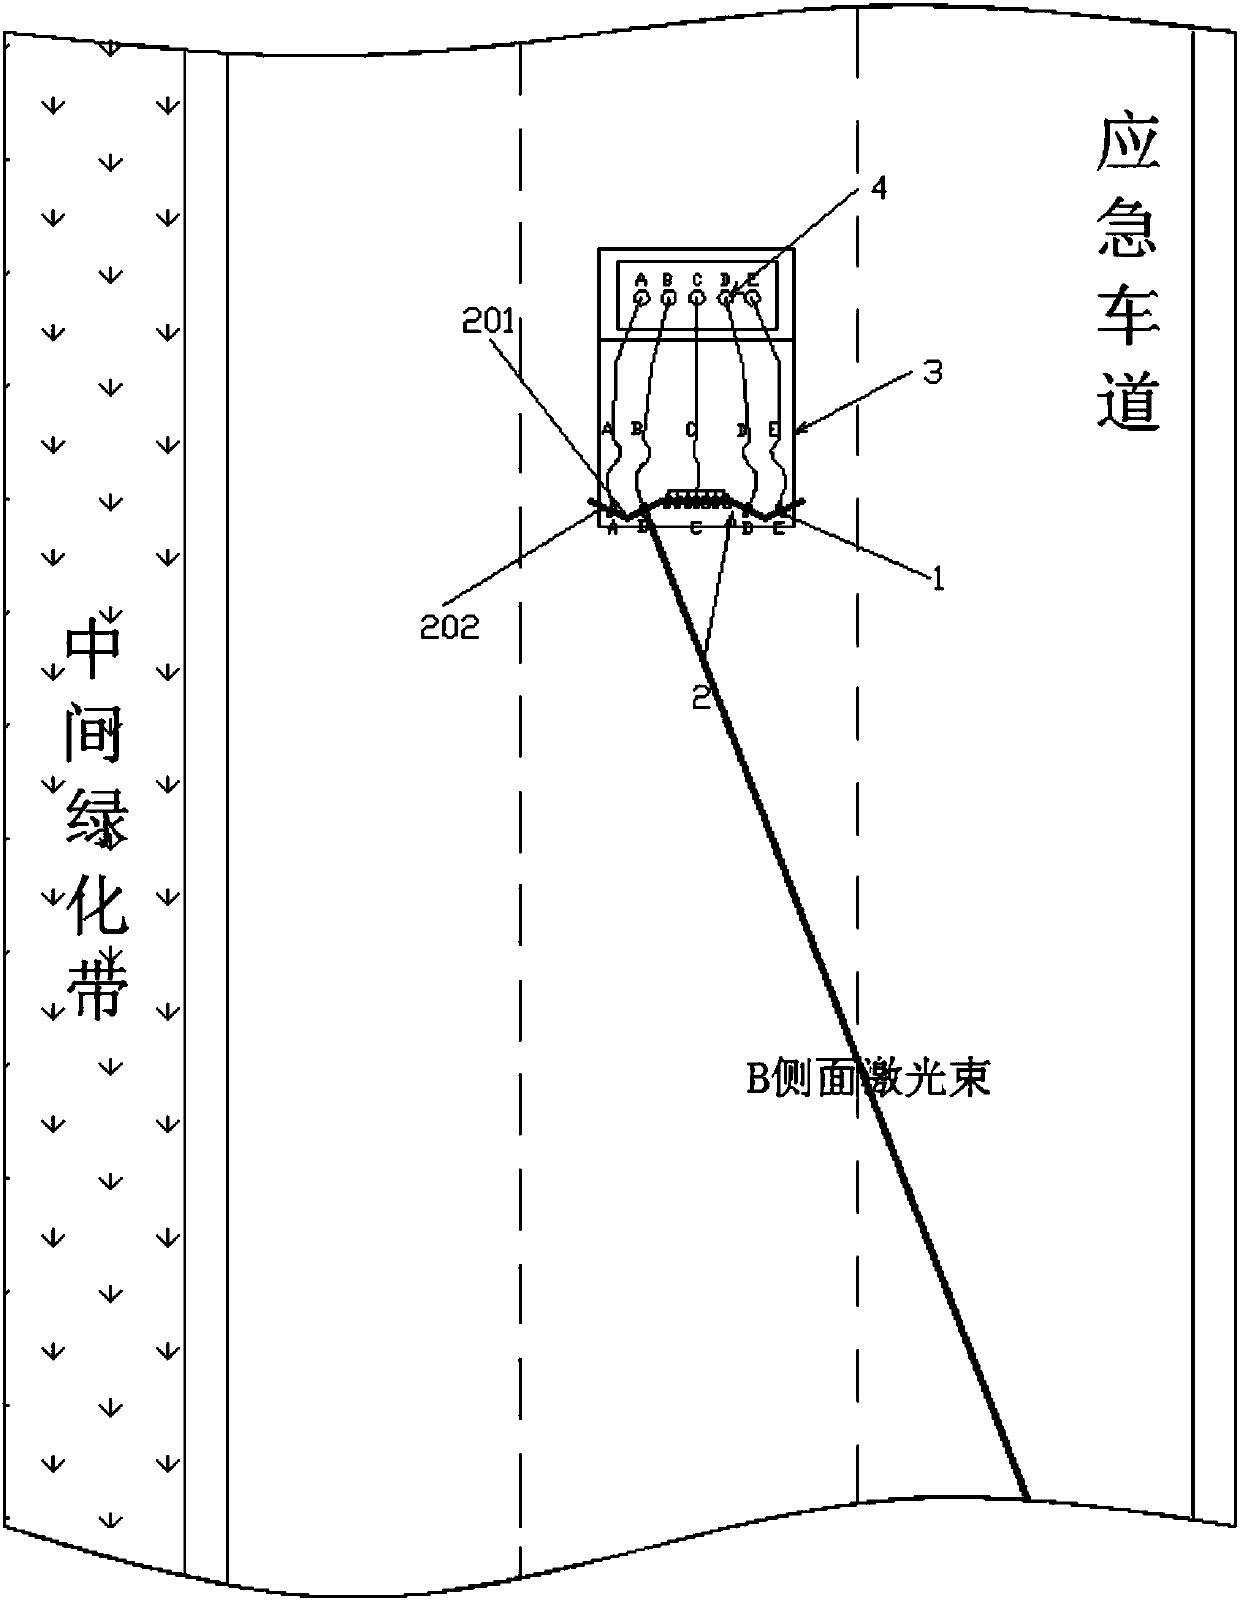 Vehicle-mounted laser-guiding road blockage device for freeway accident site